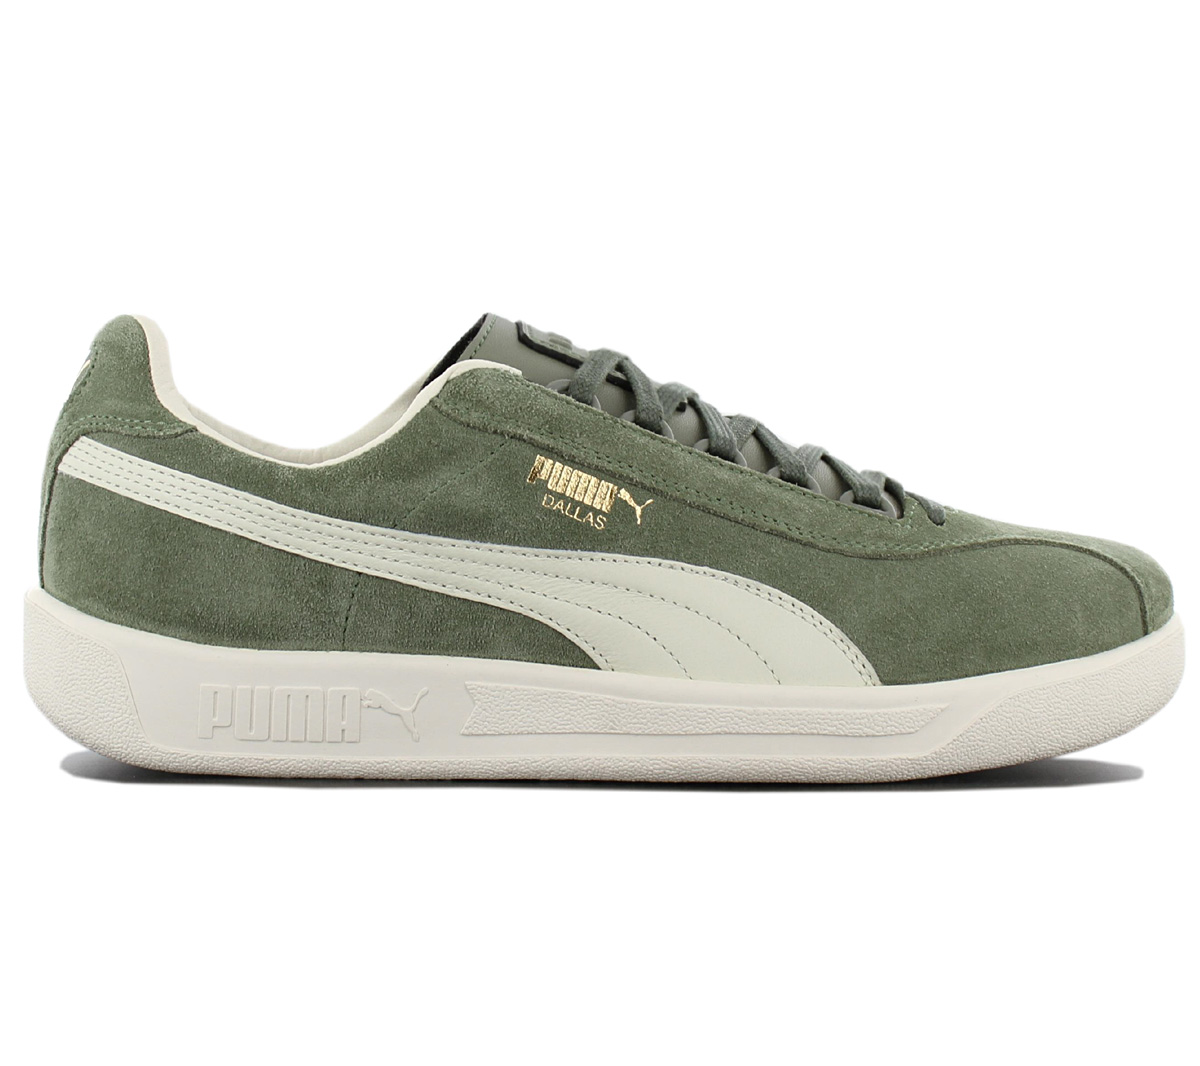 green puma shoes Online Shopping for 